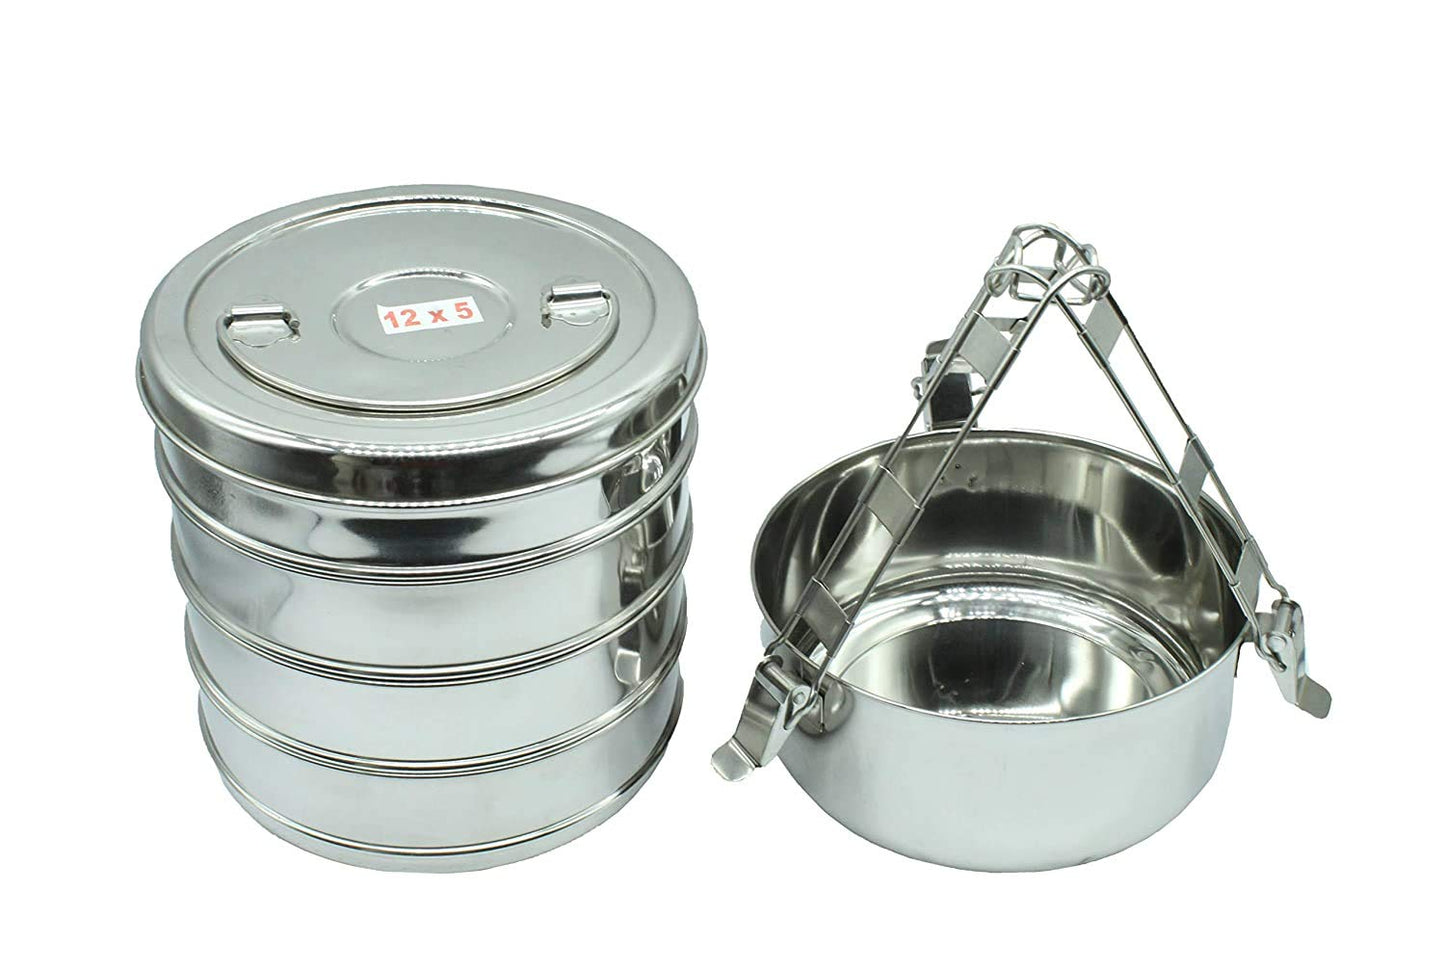 Stainless Steel 5 Tier Lunch Box | Tiffin Box (Size: 12x5)